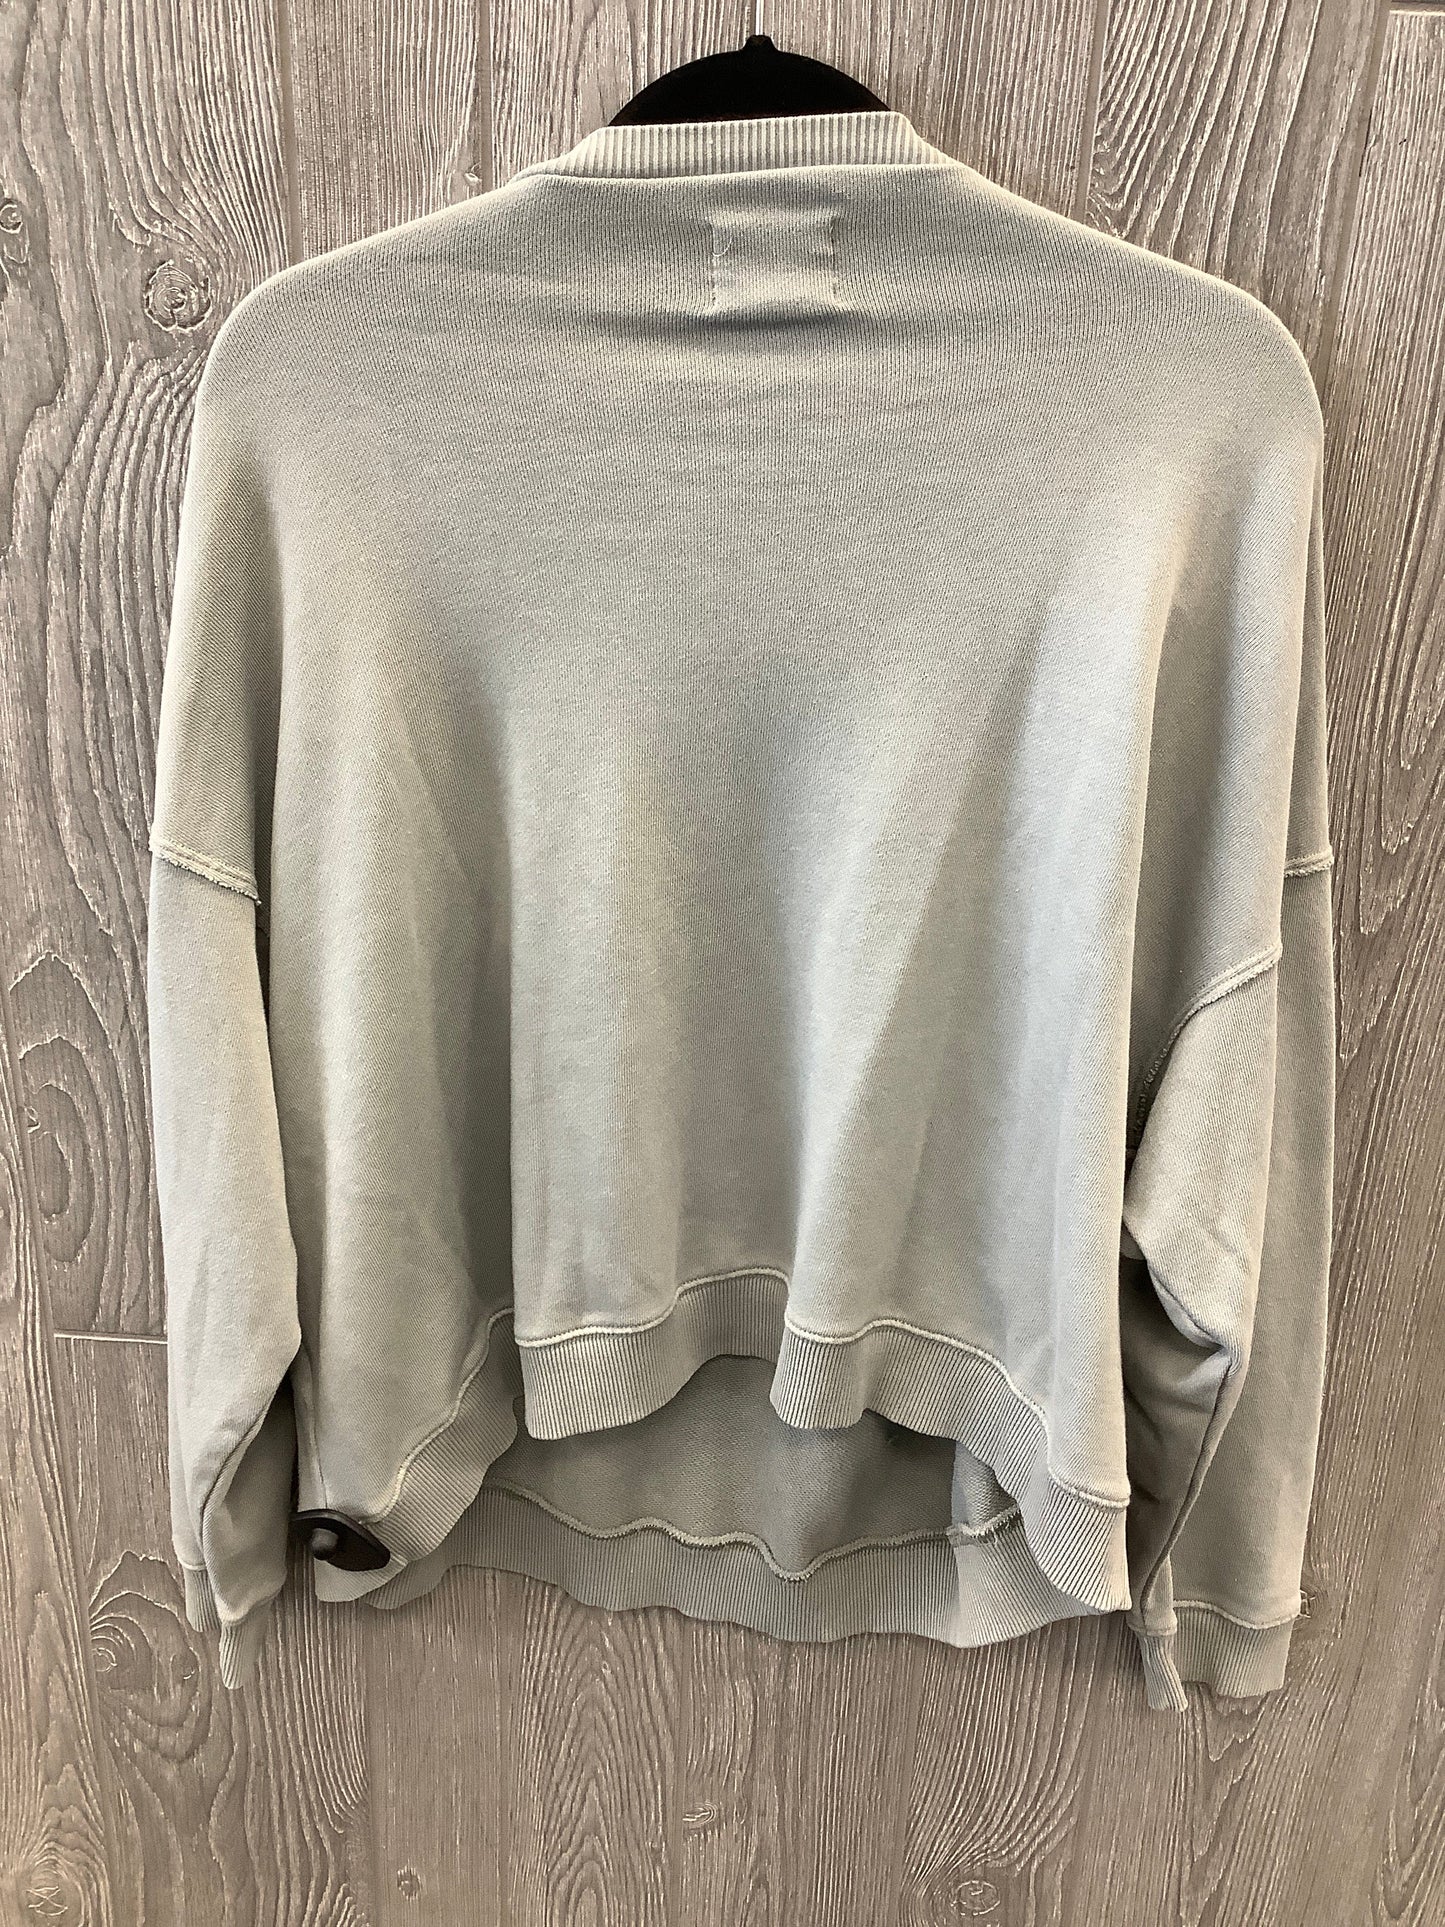 Grey Top Long Sleeve American Eagle, Size M